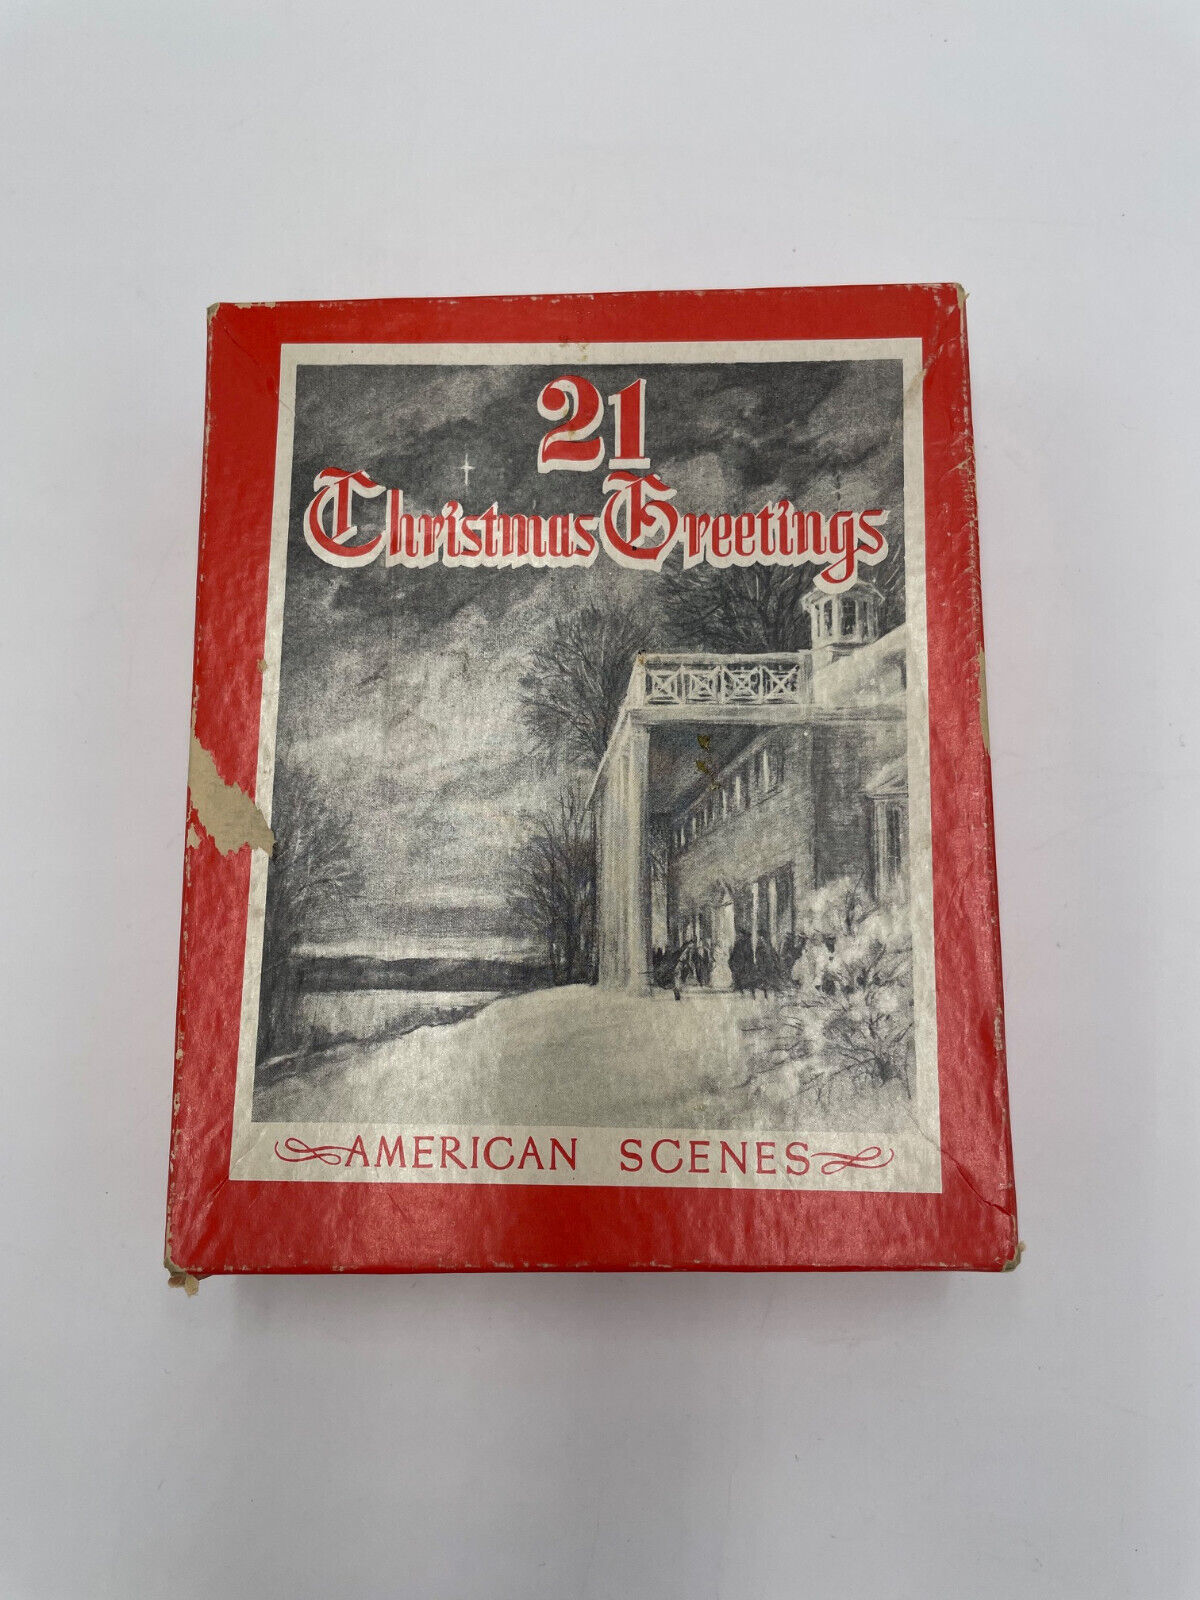 Set of 24 Antique Christmas Greeting Cards American Scenes Lithographs Box READ